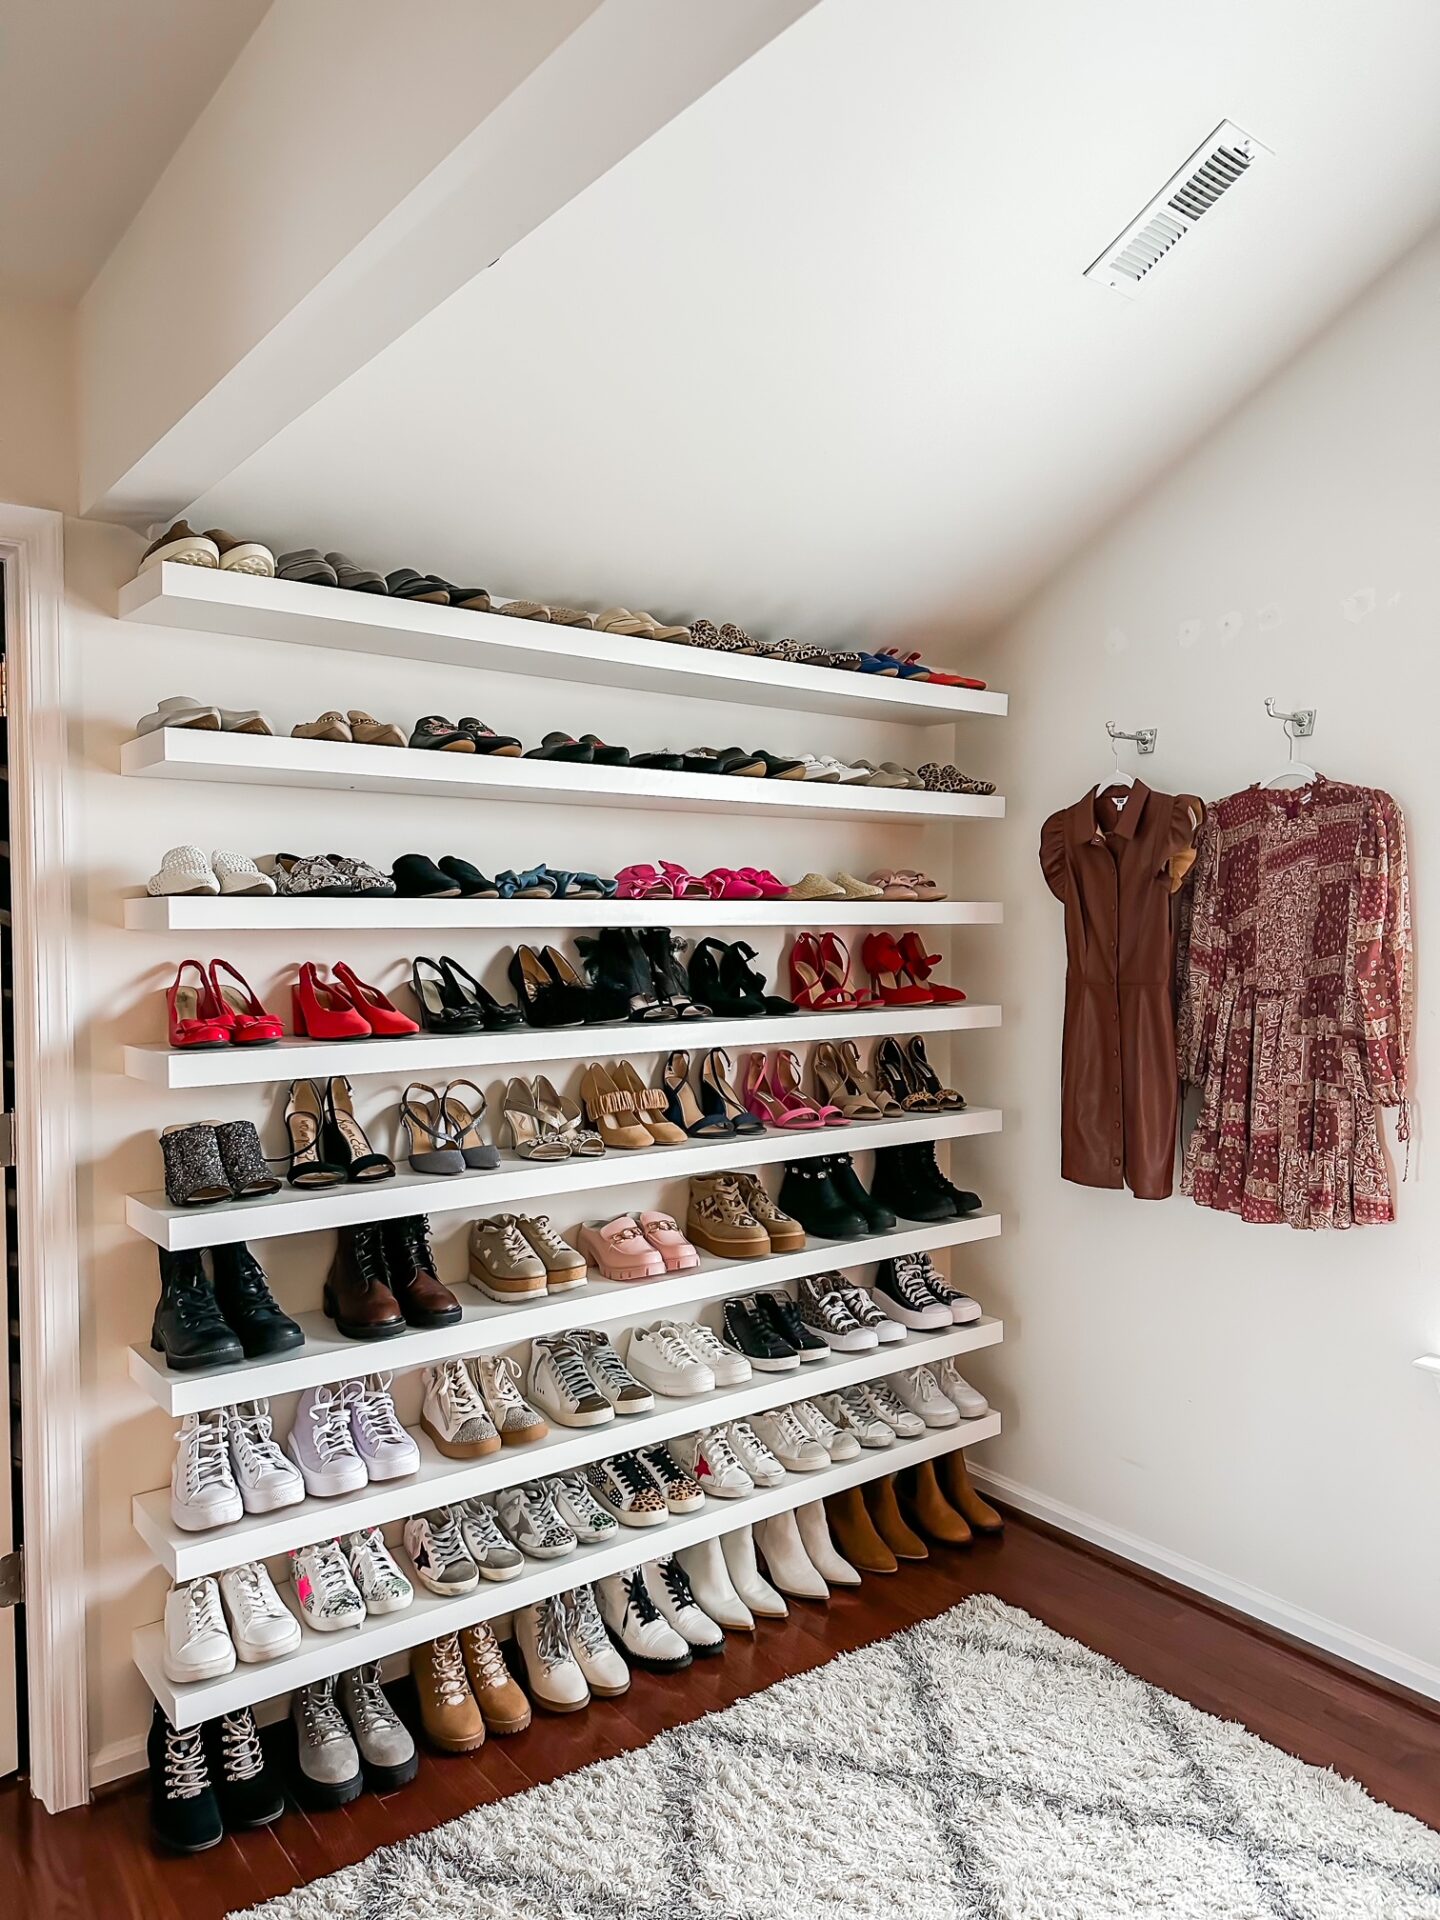 DREAM SHOE SHELF SYSTEM - An incredible before-and-after closet transformation and master closet organization project with luxury Philadelphia professional organizers, The Organized Home Co.